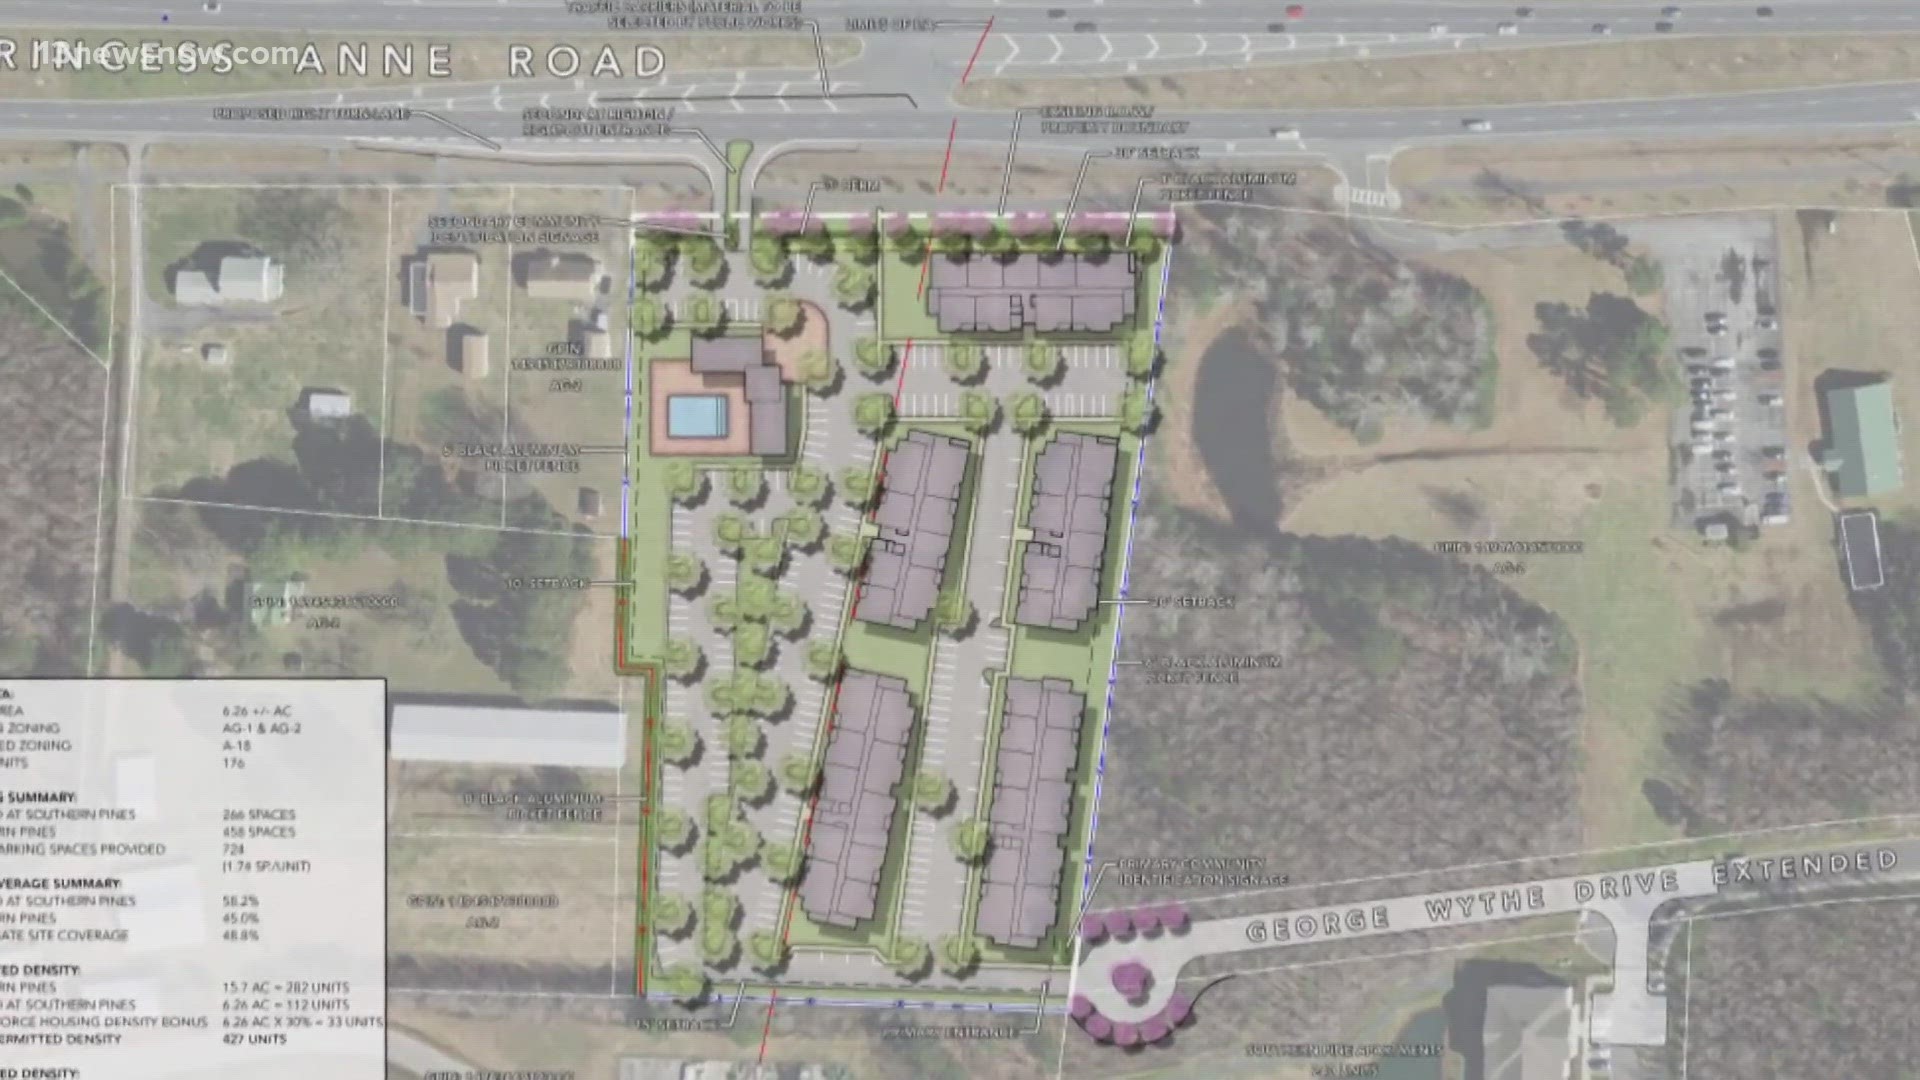 A contentious development project moves forward in Virginia Beach. The proposal would build more than 100 apartment units near the Virginia Beach Municipal Center.